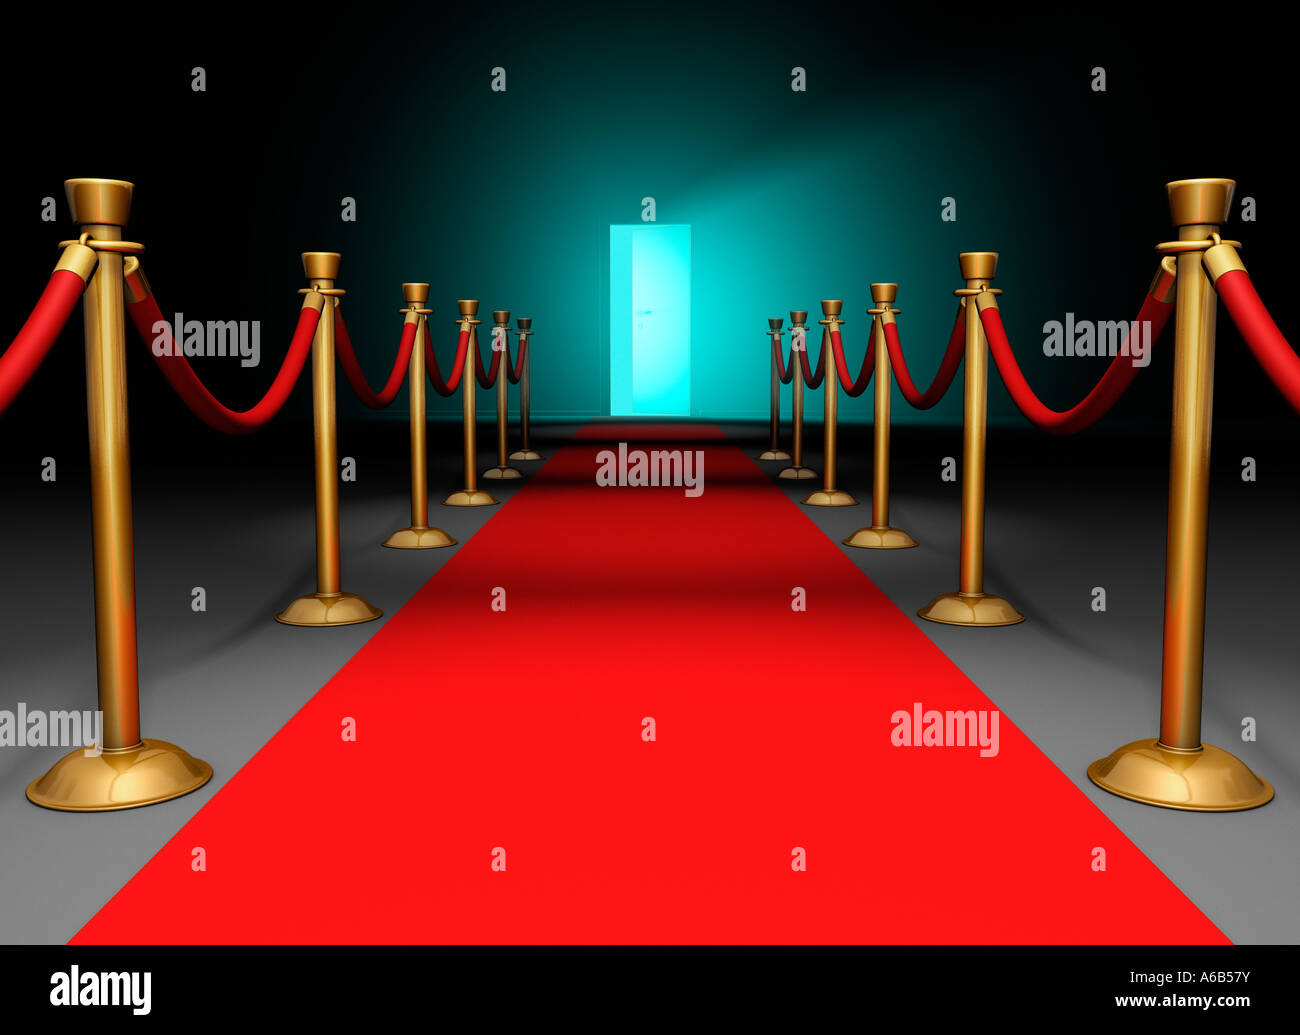 red carpet with securing out of the entrance there comes a ray of light entry access roter Teppich celebrity walk Stock Photo